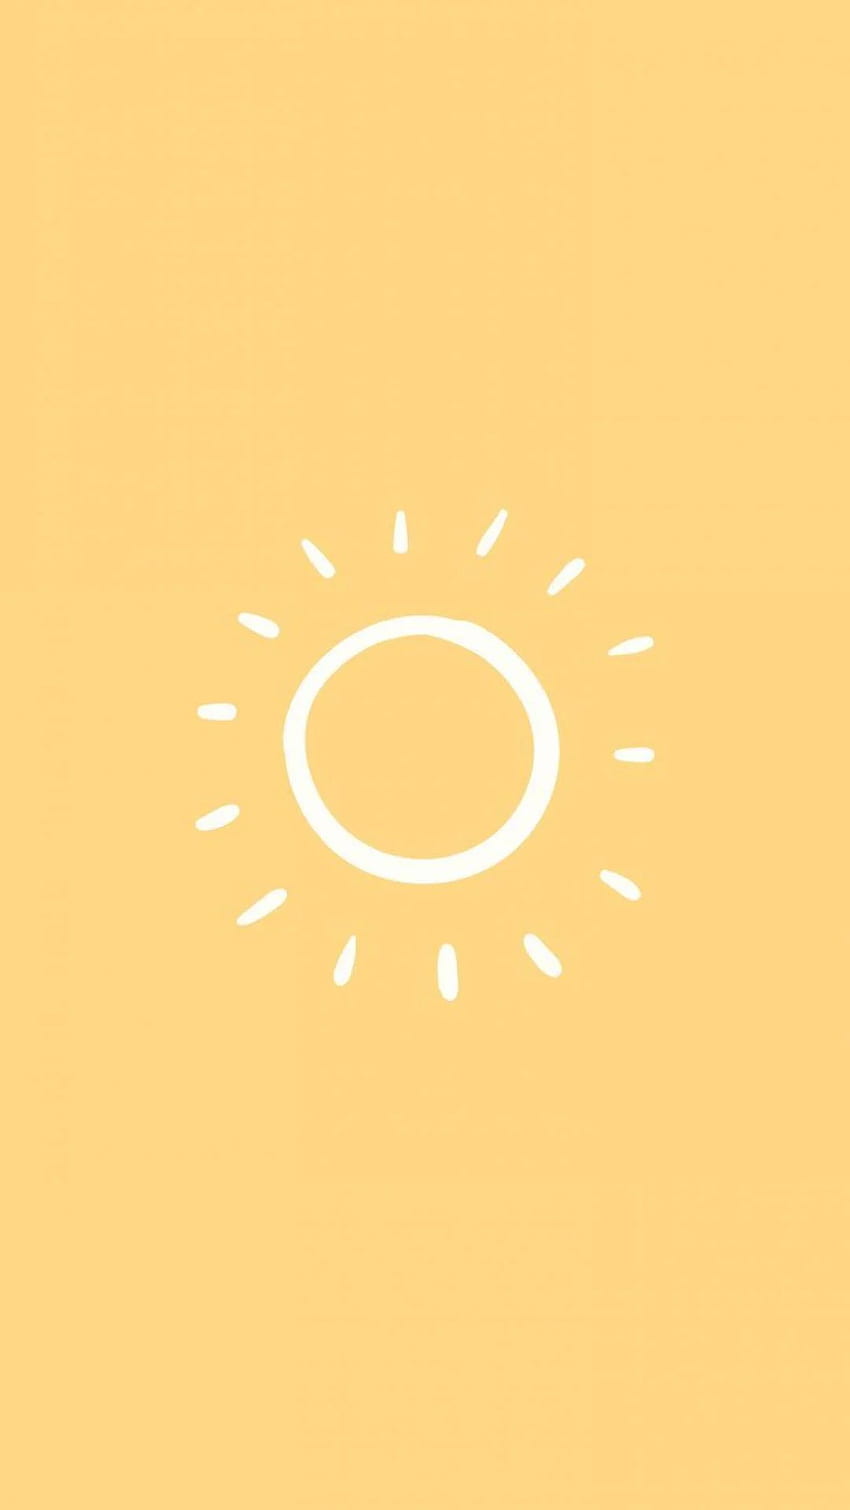 A yellow background with a white sun - Profile picture